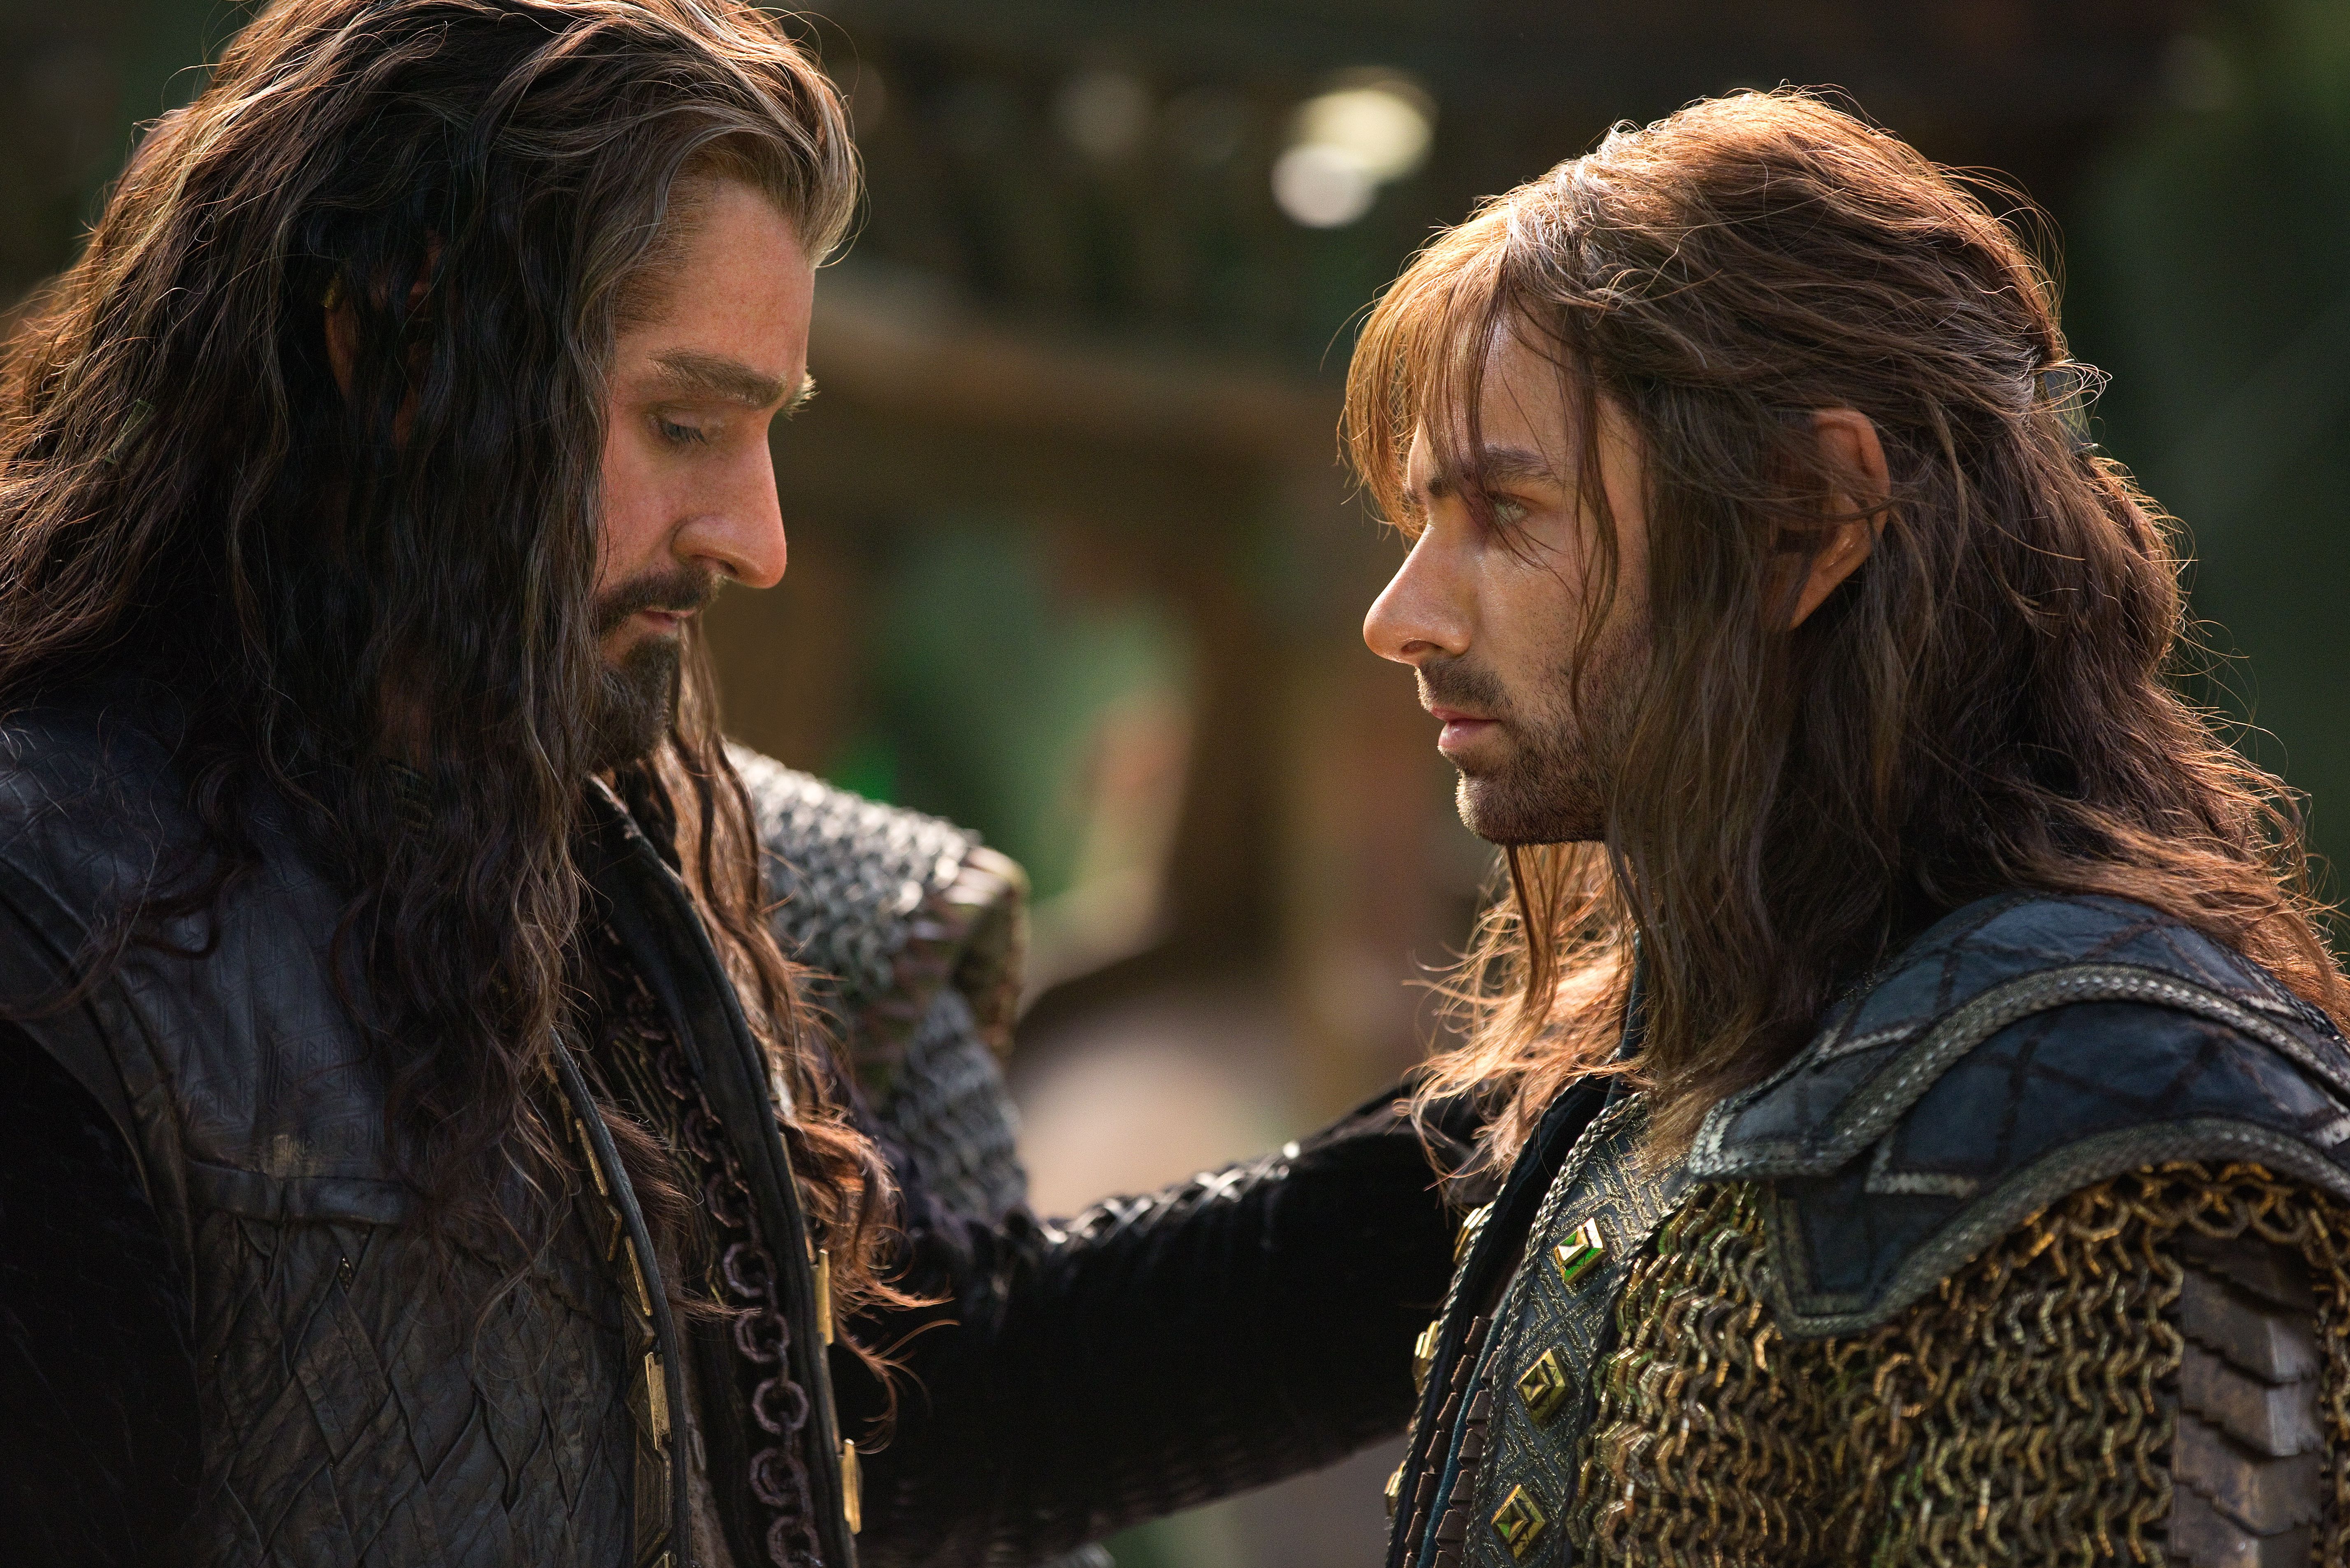 Two dwarfs having a moment in the final Hobbit film